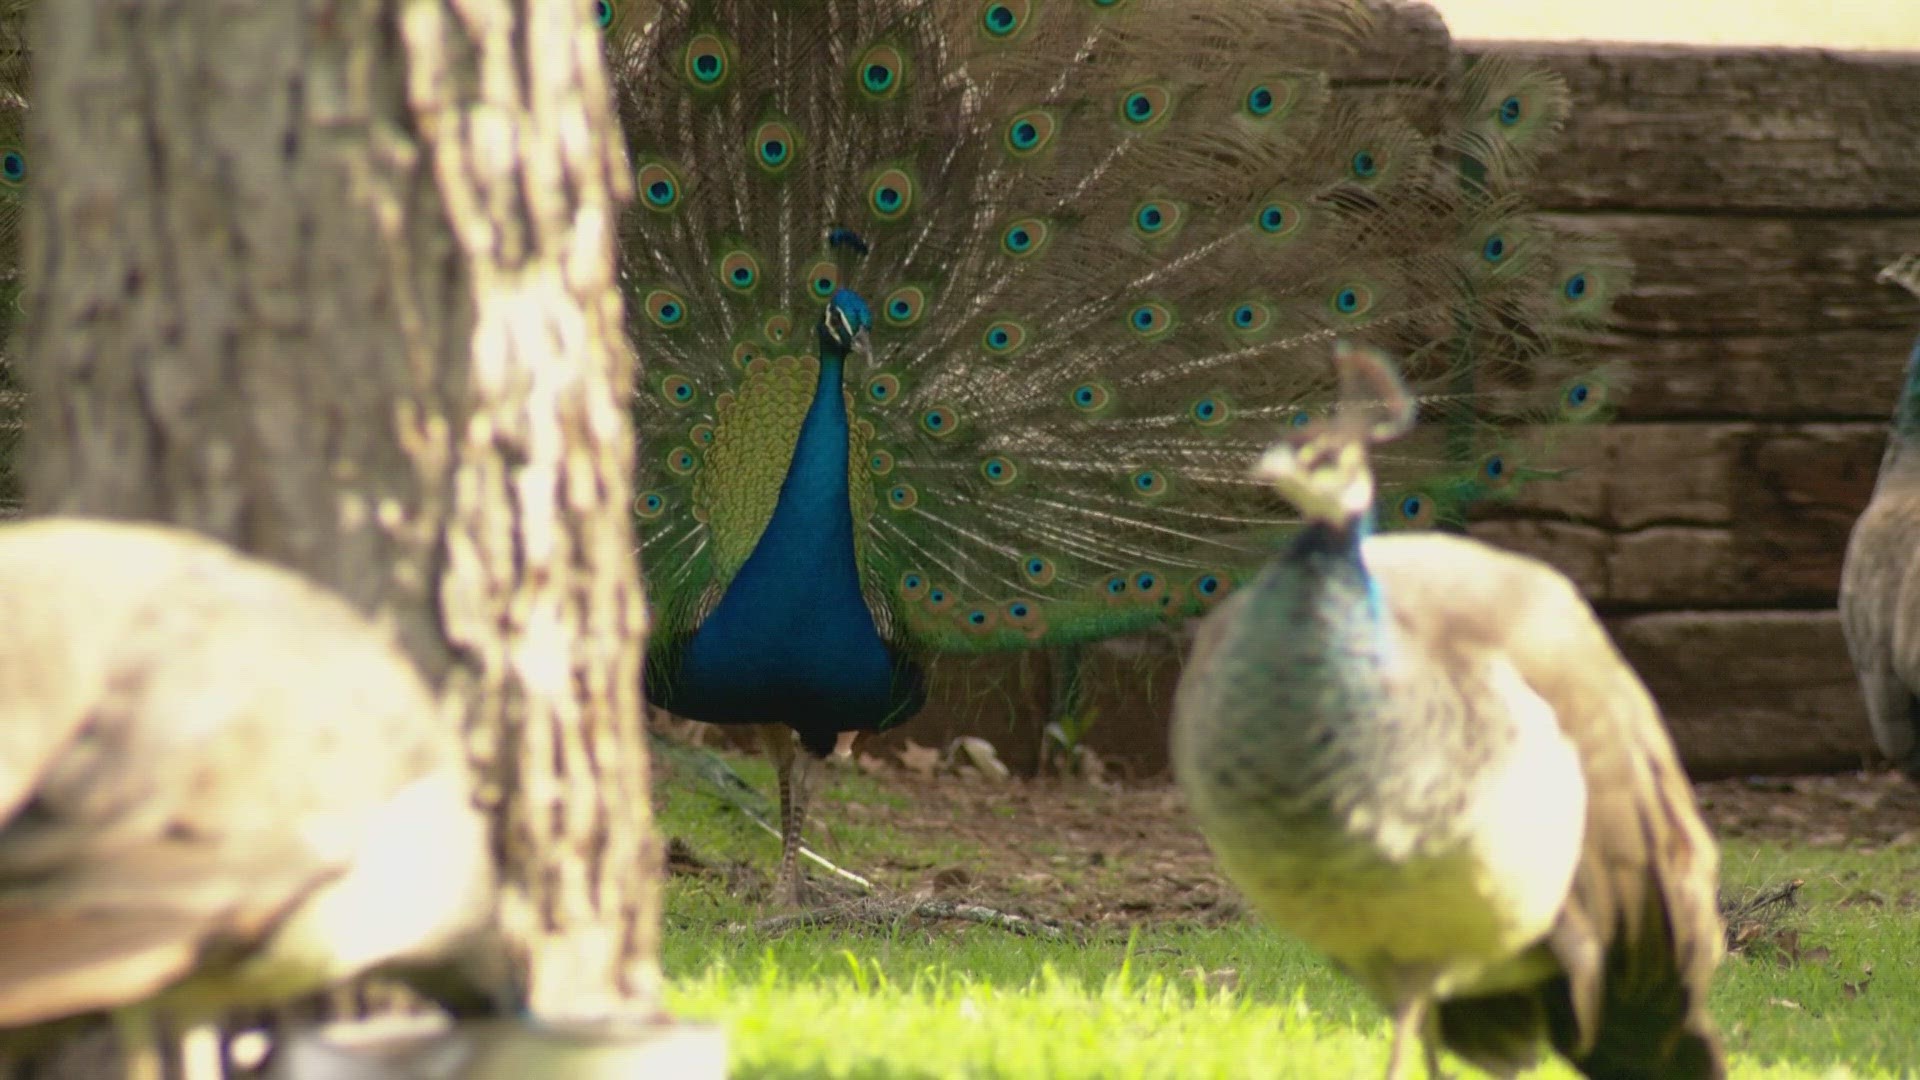 People allegedly stealing peacocks from local neighborhood